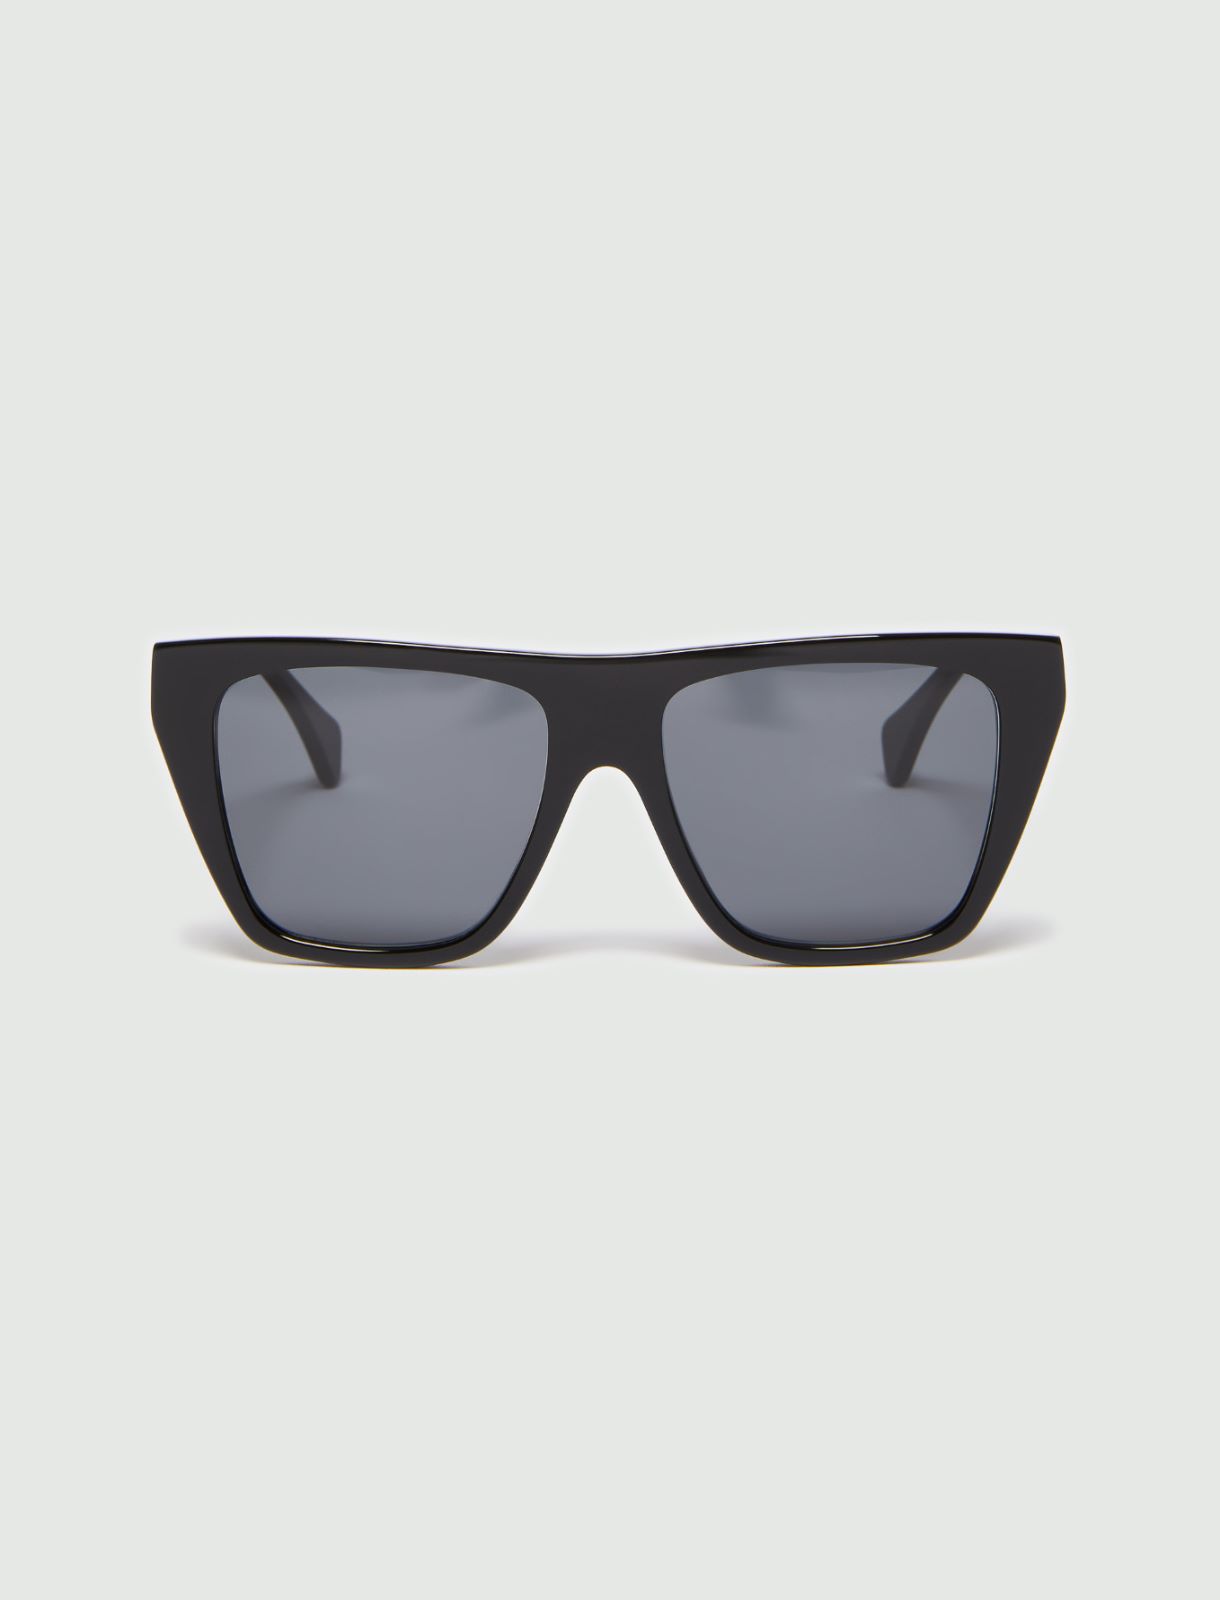 Seevision Sun glasses: for sale at 9.99€ on Mecshopping.it